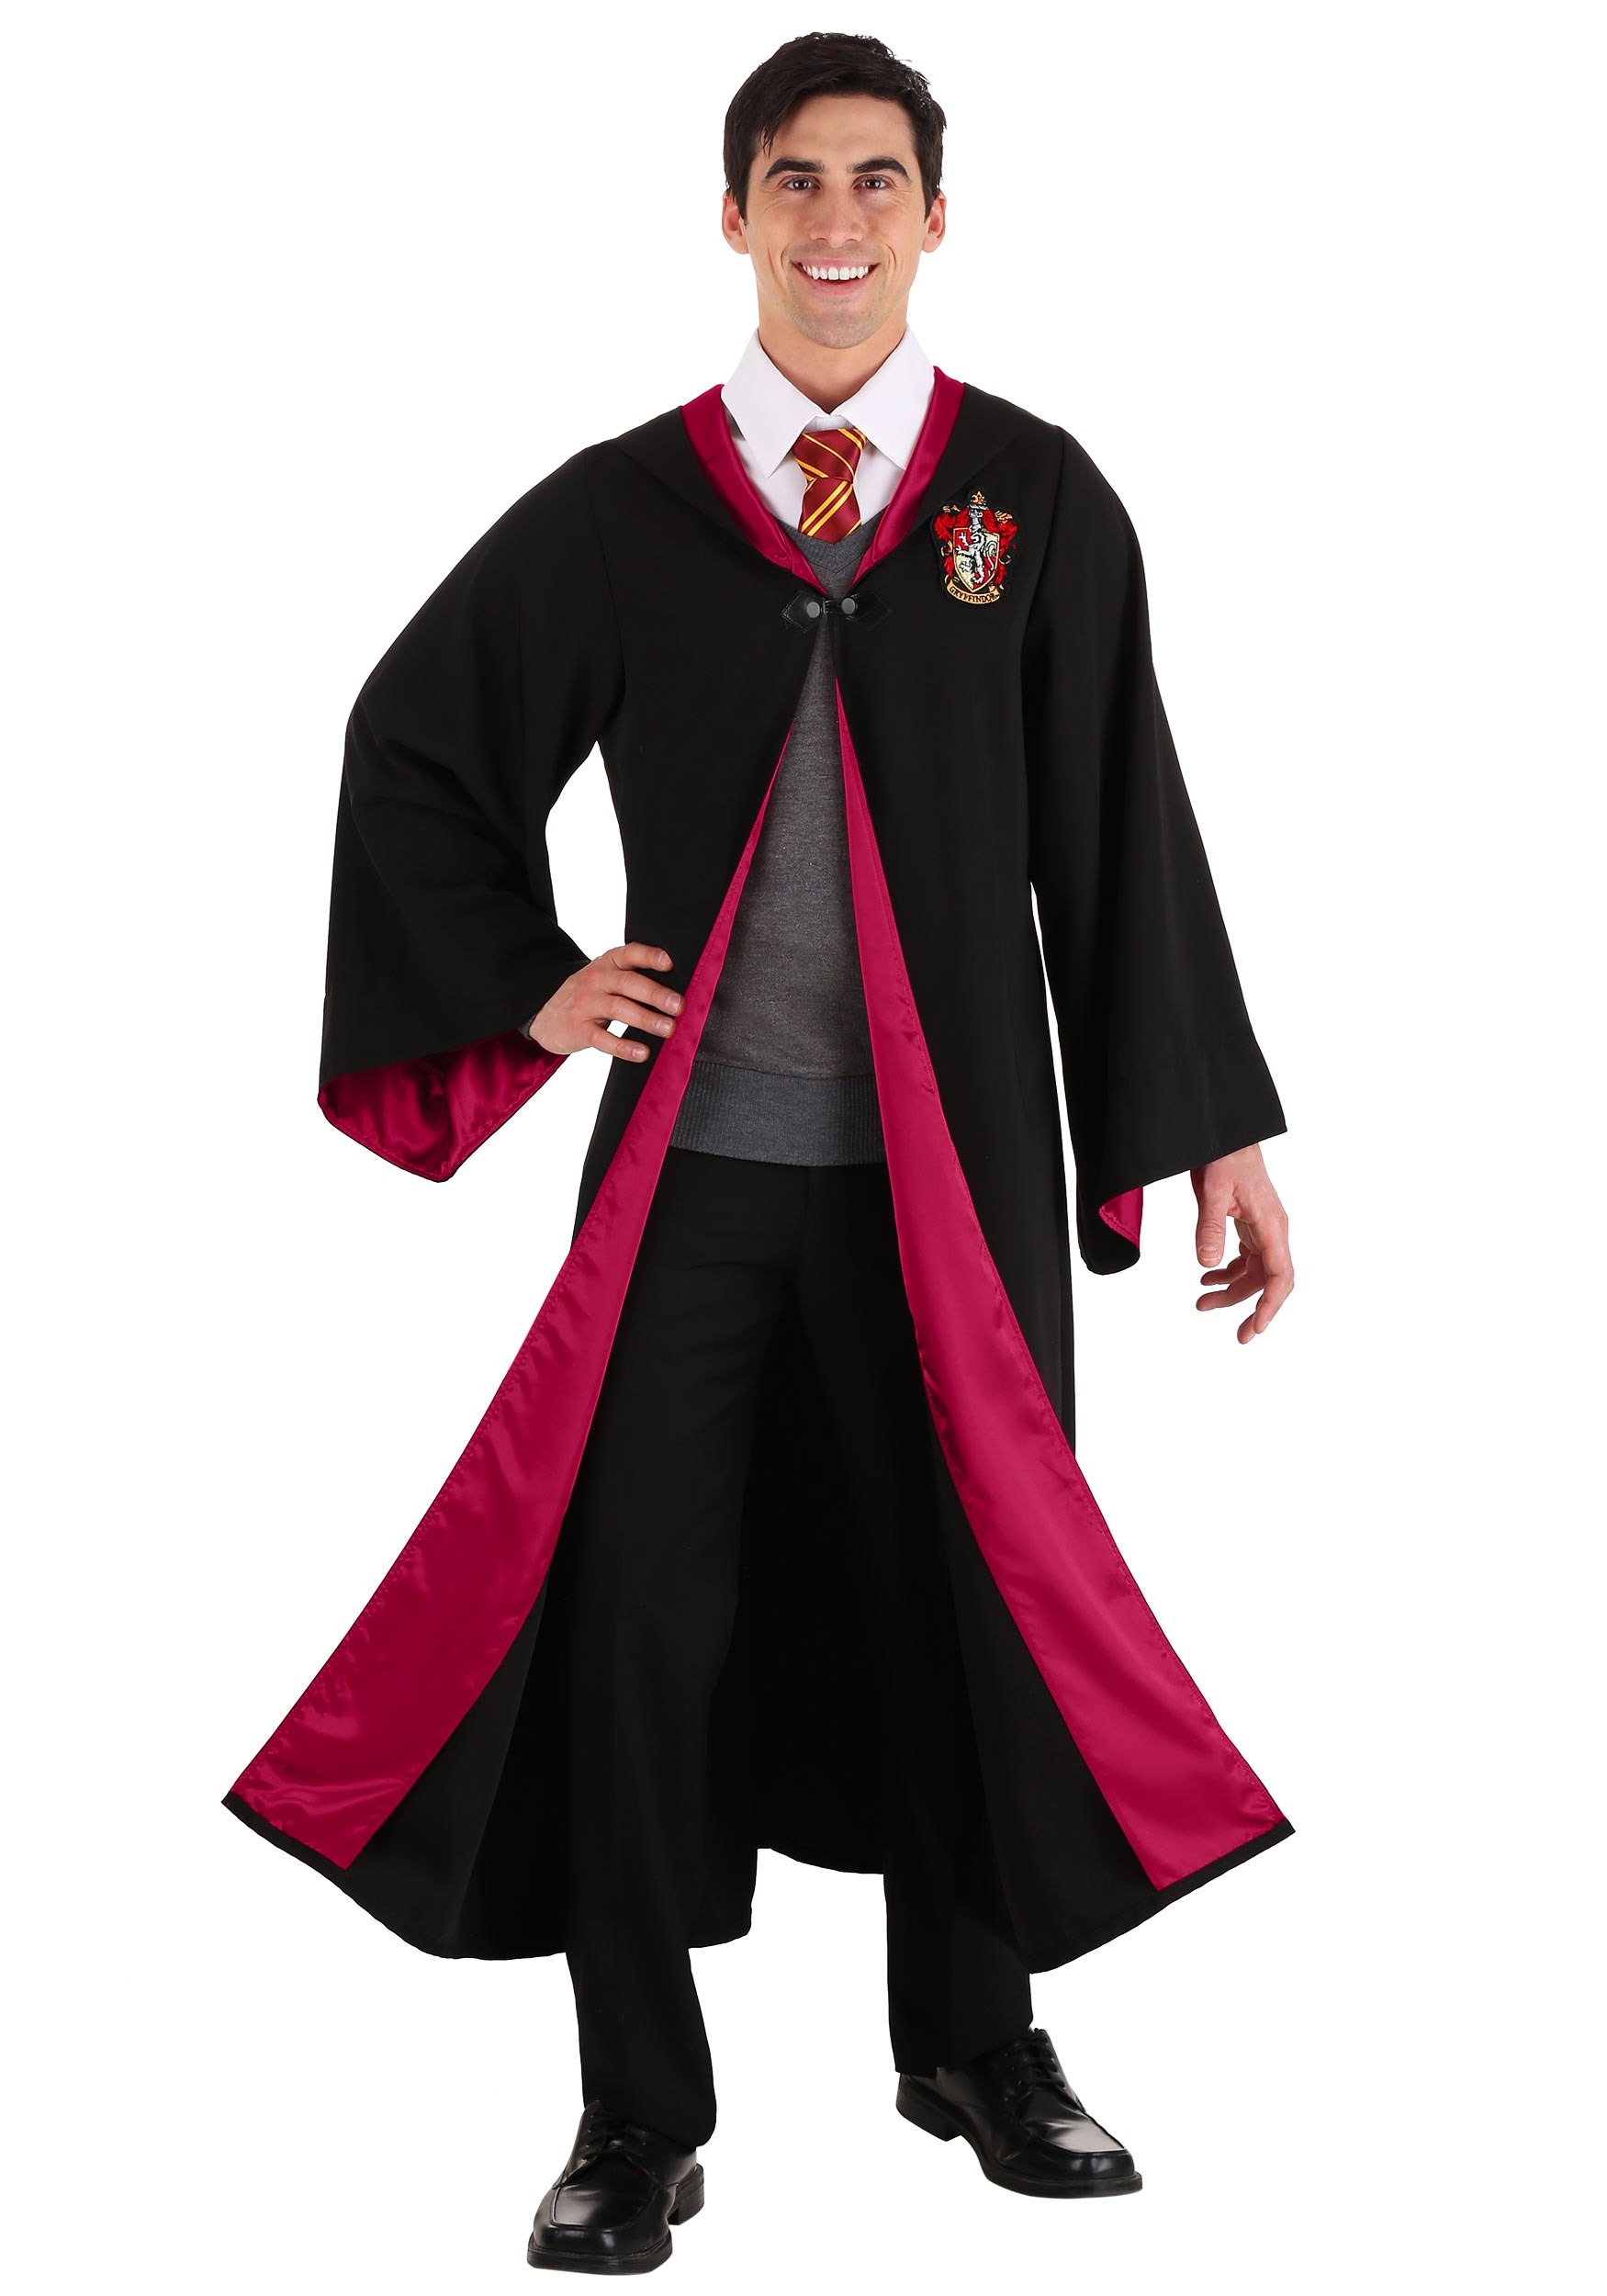 Image of Deluxe Adult's Harry Potter Costume ID FUN1444AD-M